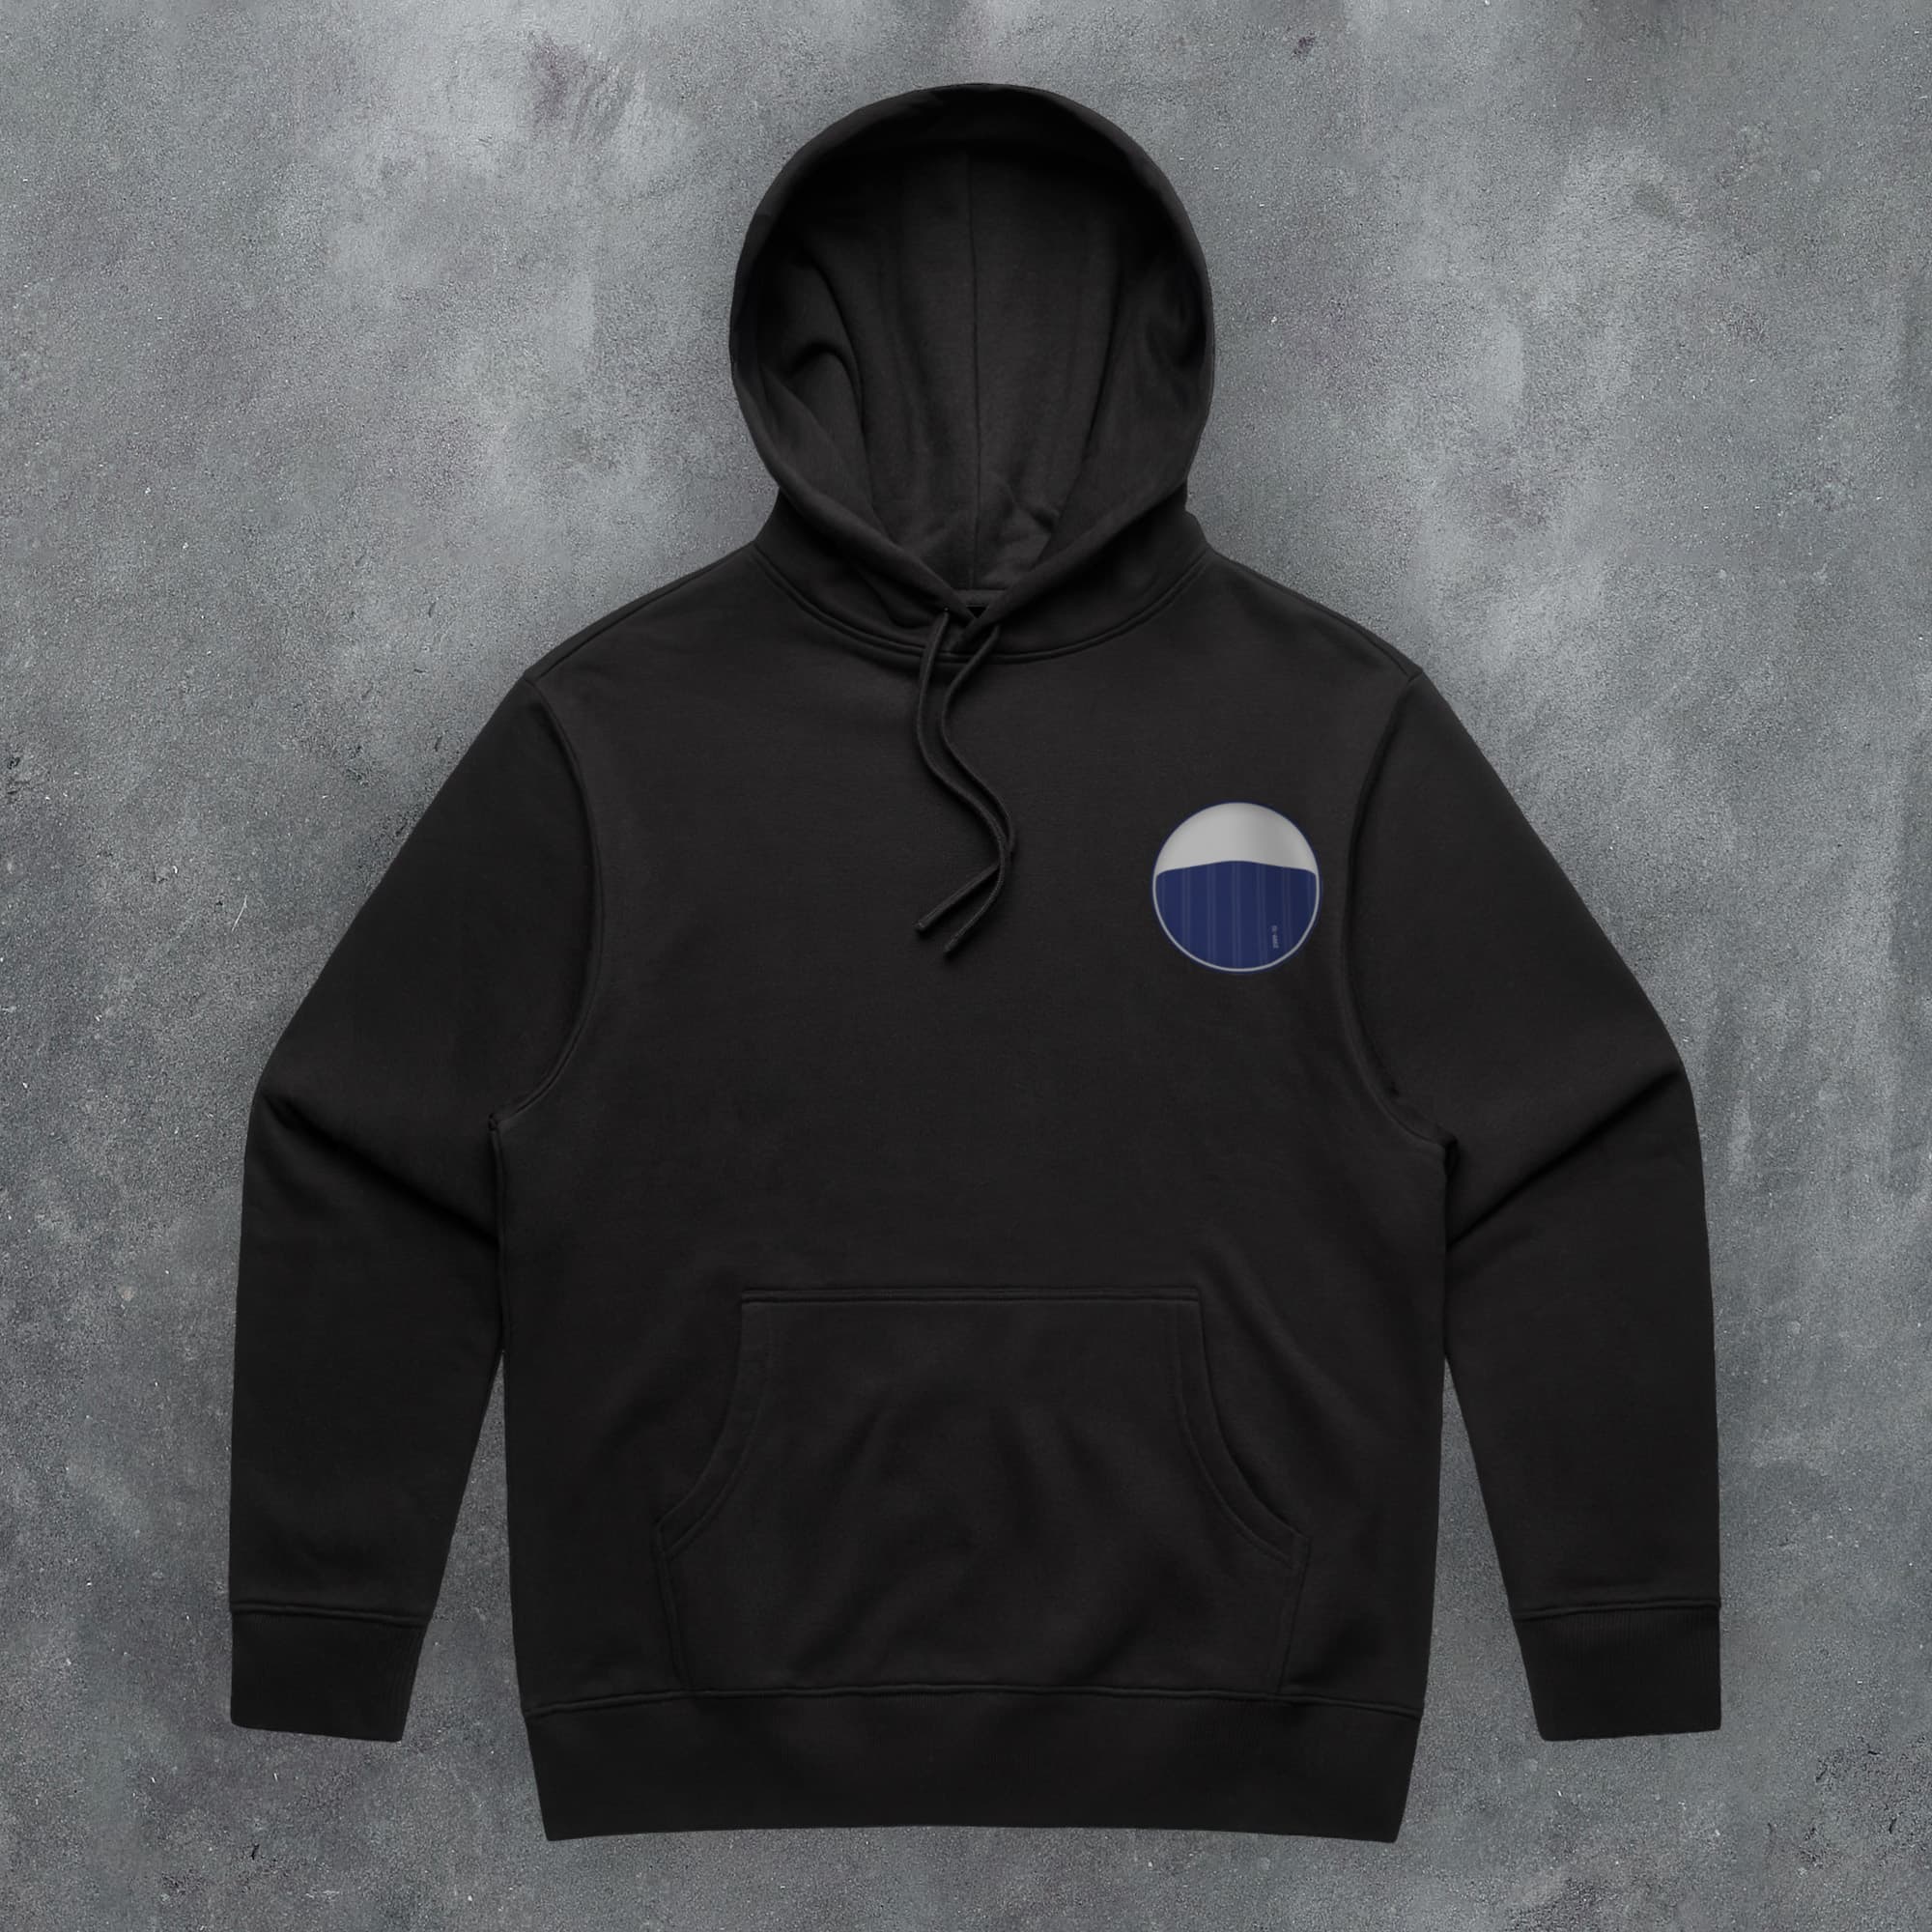 a black hoodie with a blue circle on it